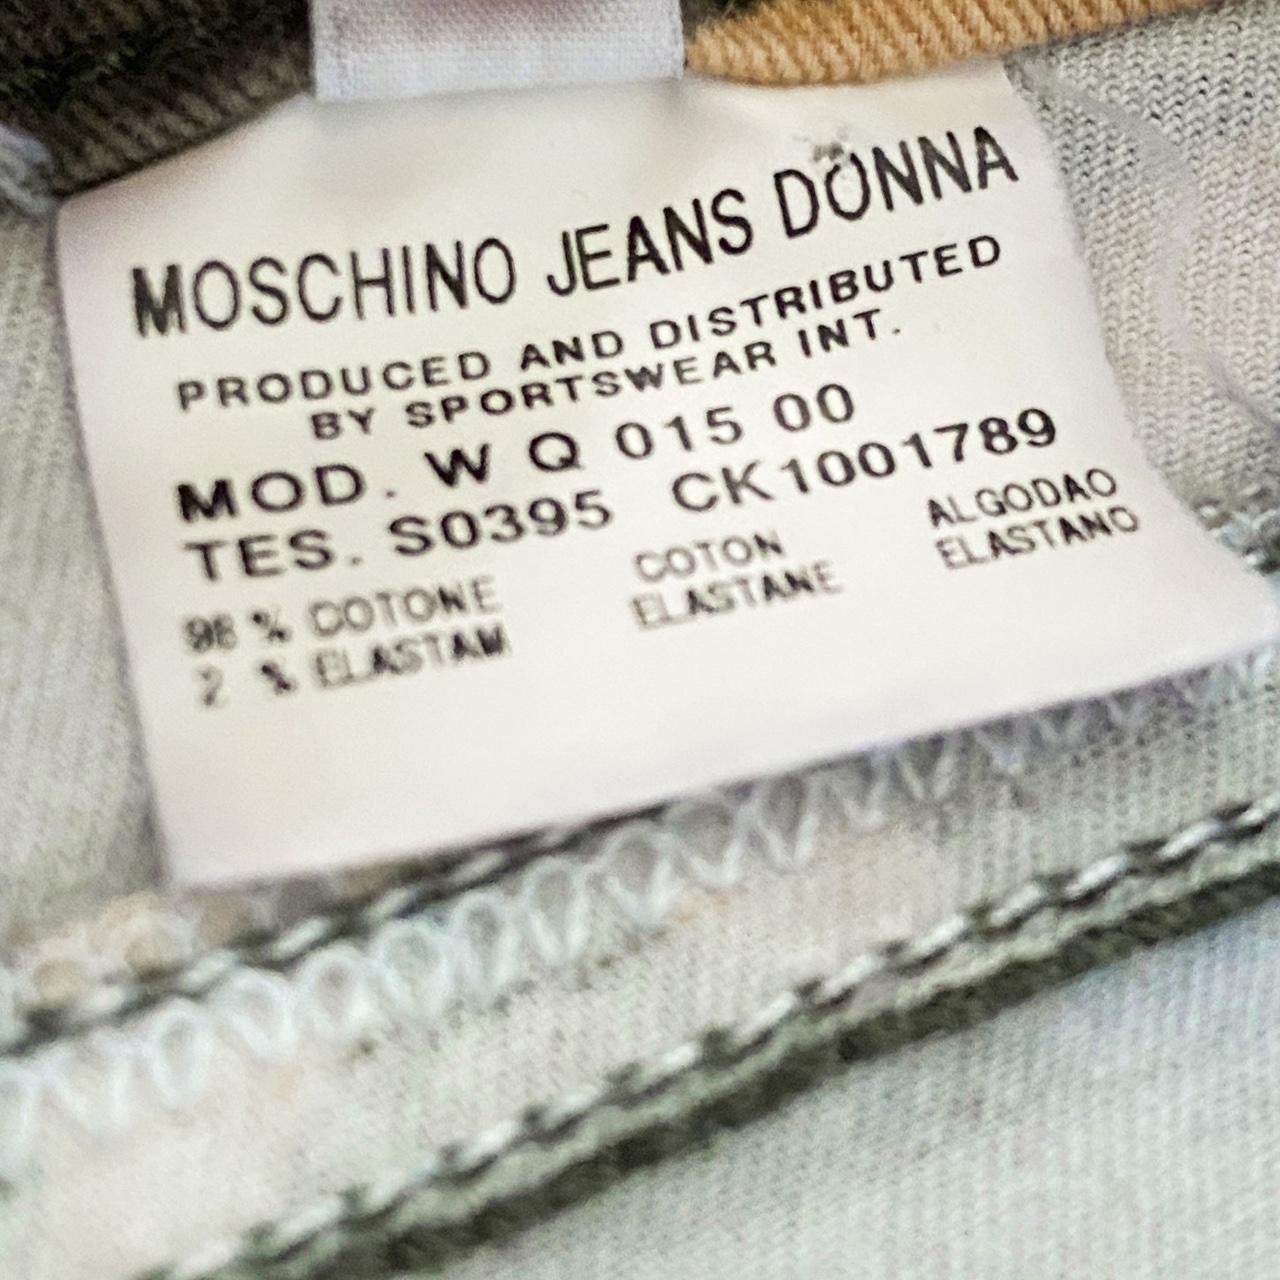 Moschino Jeans 2000s Star Flares (S)